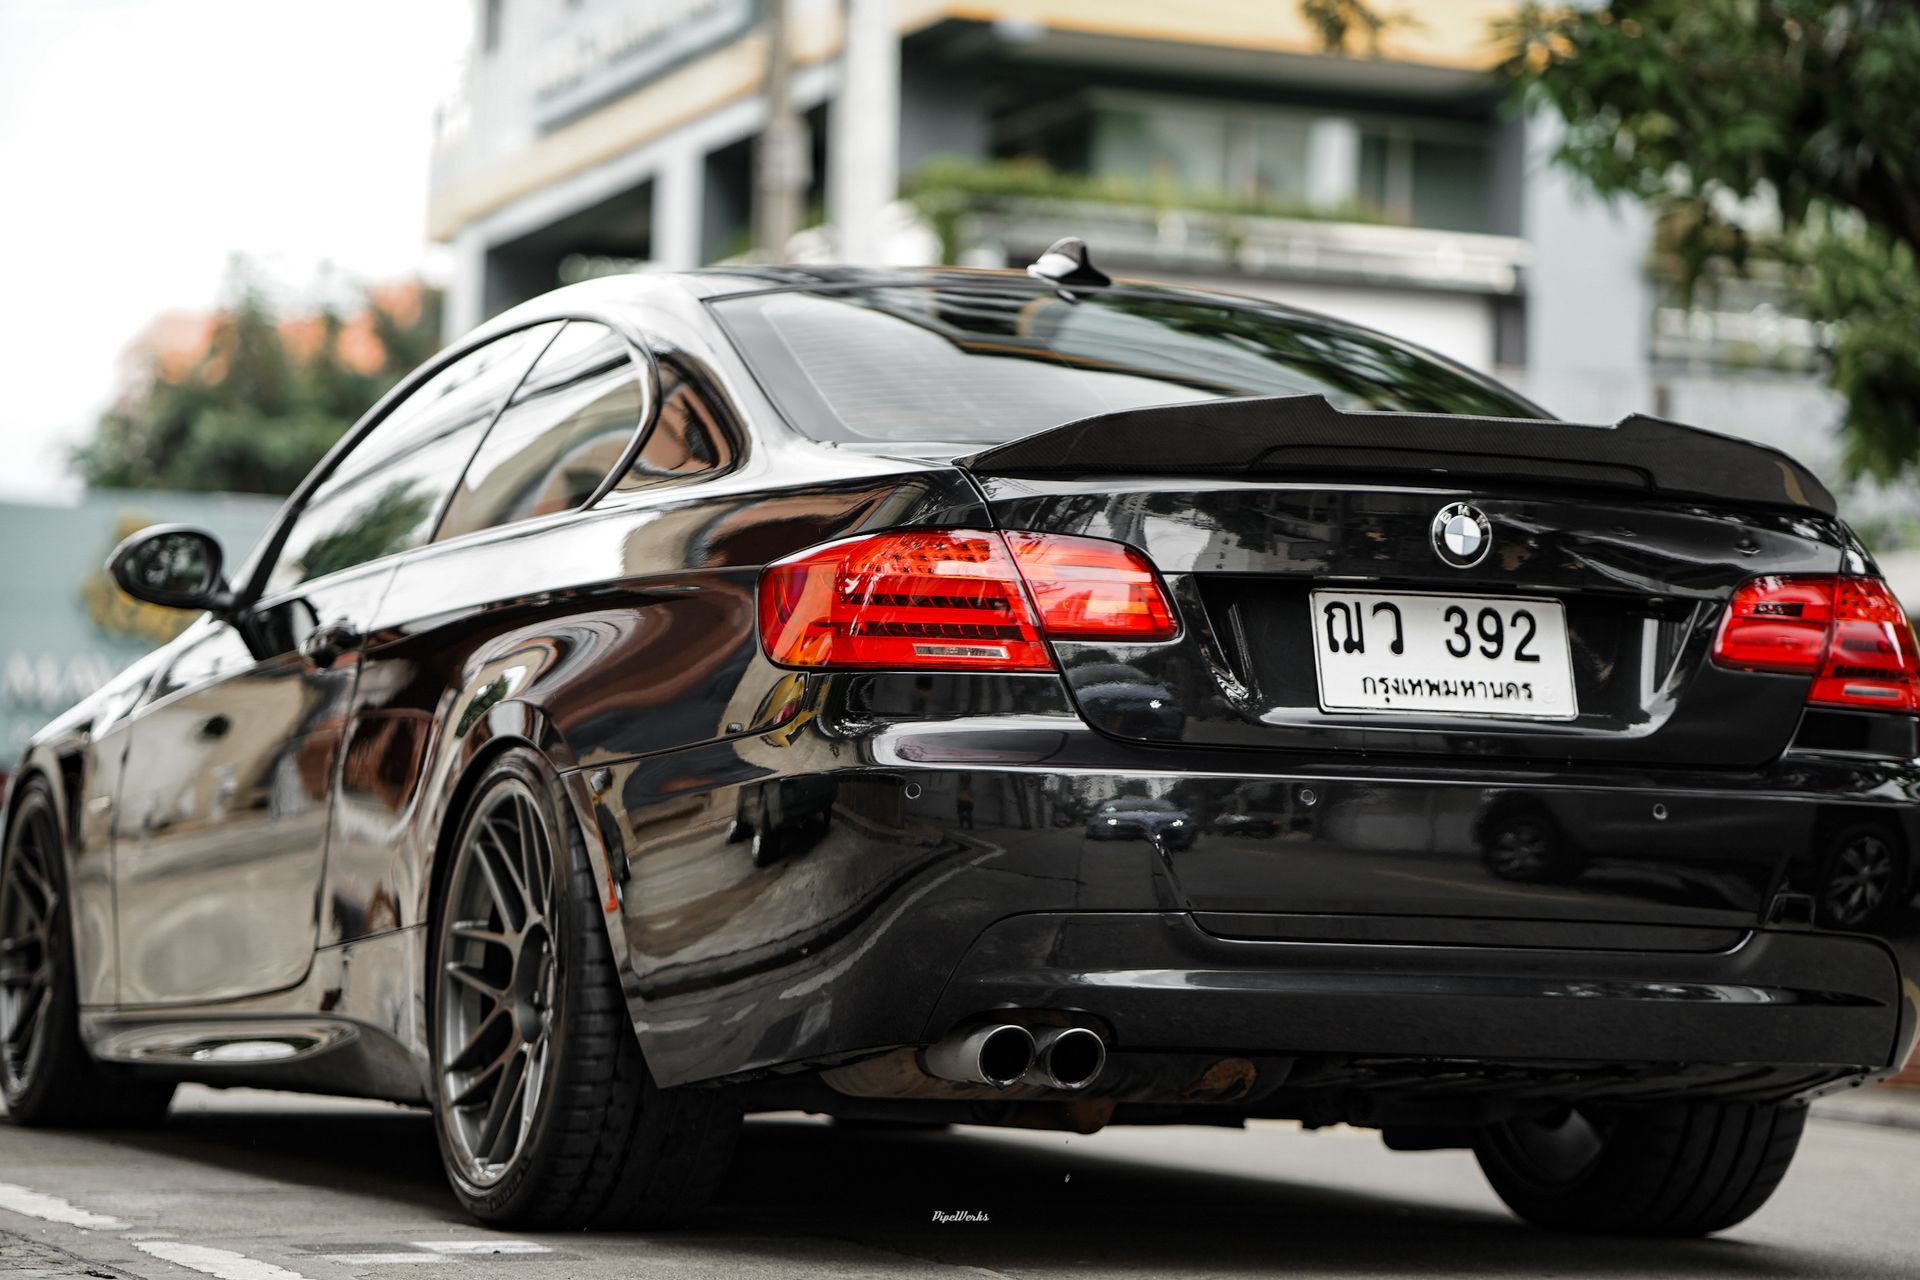 BMW E92 Coupe 3 Series with 19" ARC-8 in Anthracite